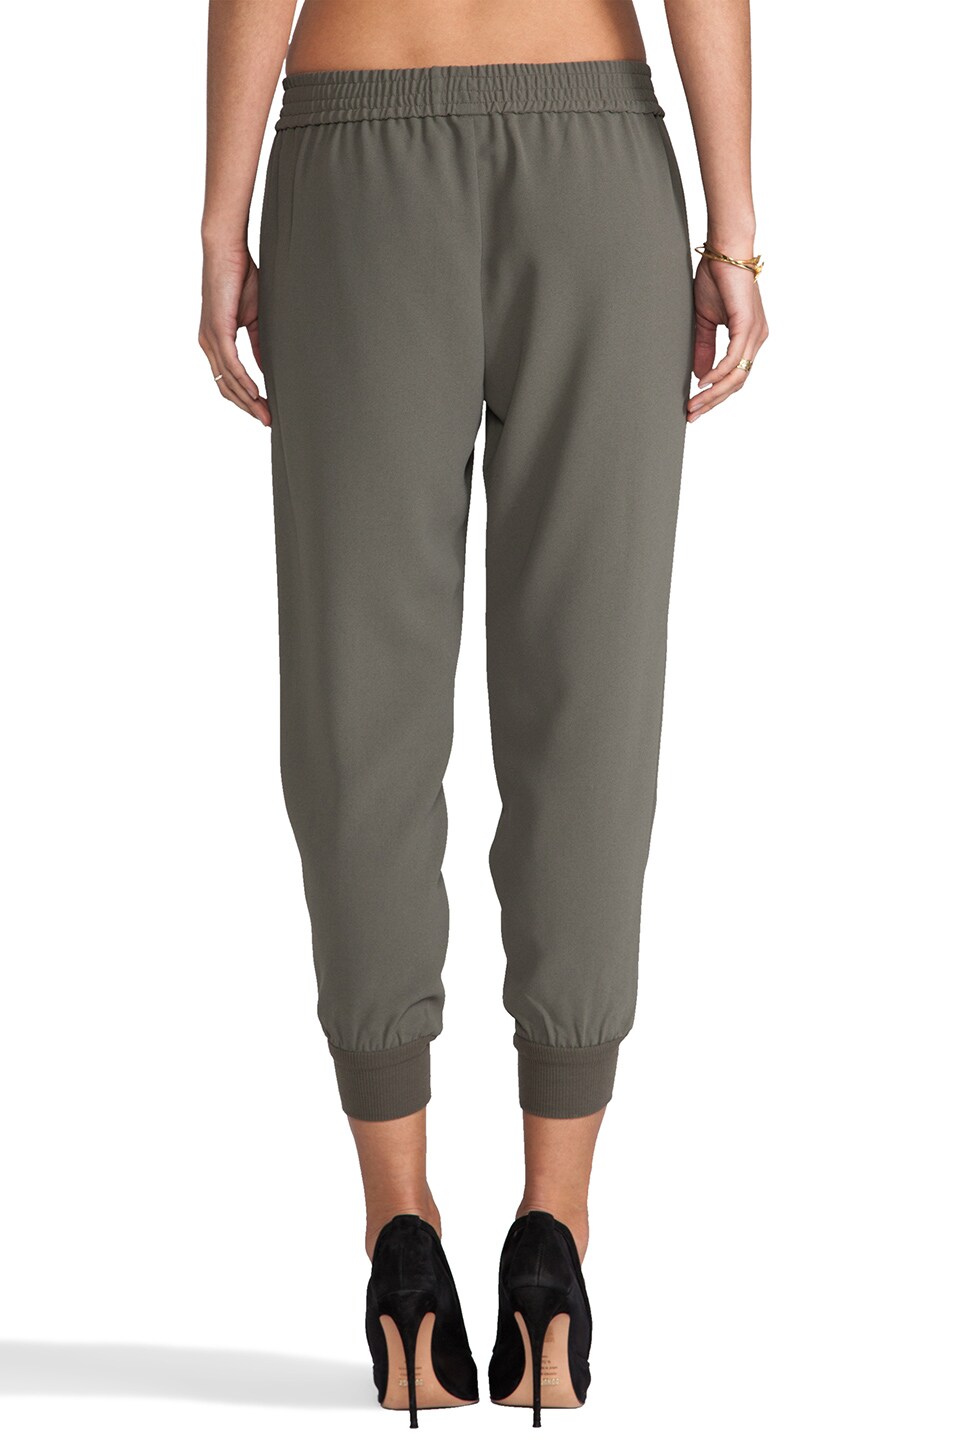 Joie Mariner Cropped Pant in Fatigue | REVOLVE